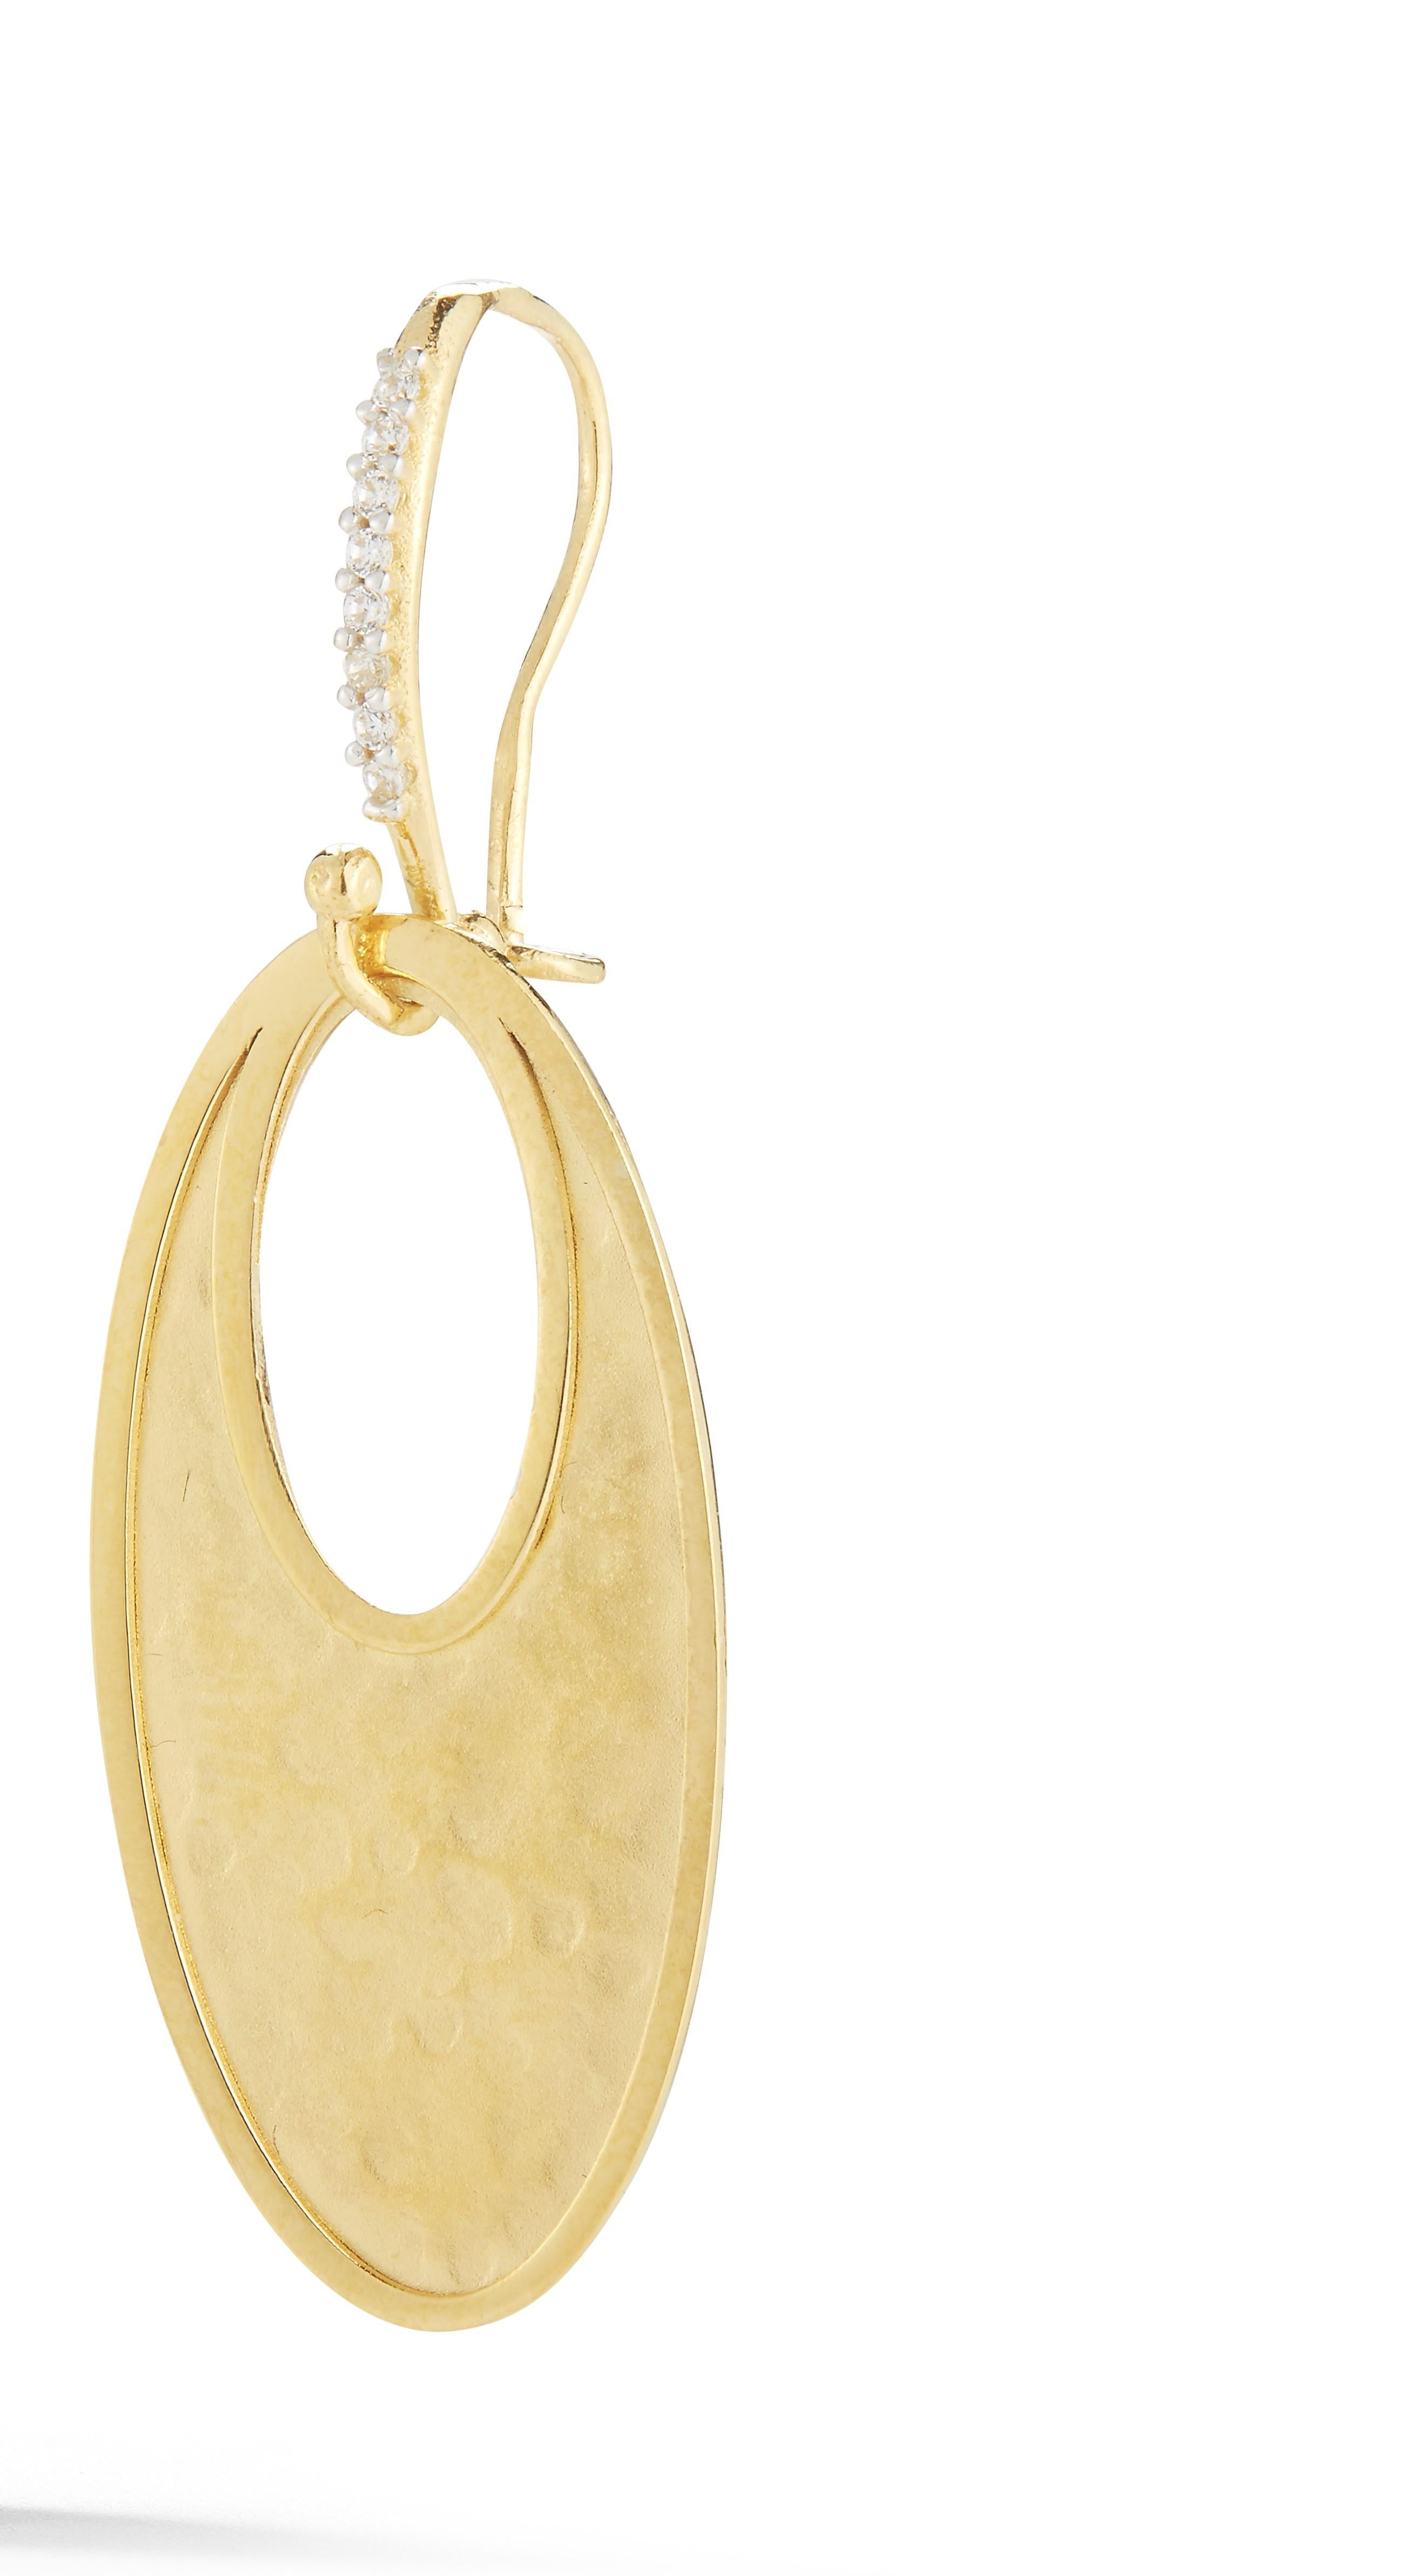 14 Karat Yellow Gold Hand-Crafted Matte and Polish-Finished Open Oval Dangling Earrings, Accented with 0.10 Carats of Pave Set Diamonds, on a Leverback Closure.

